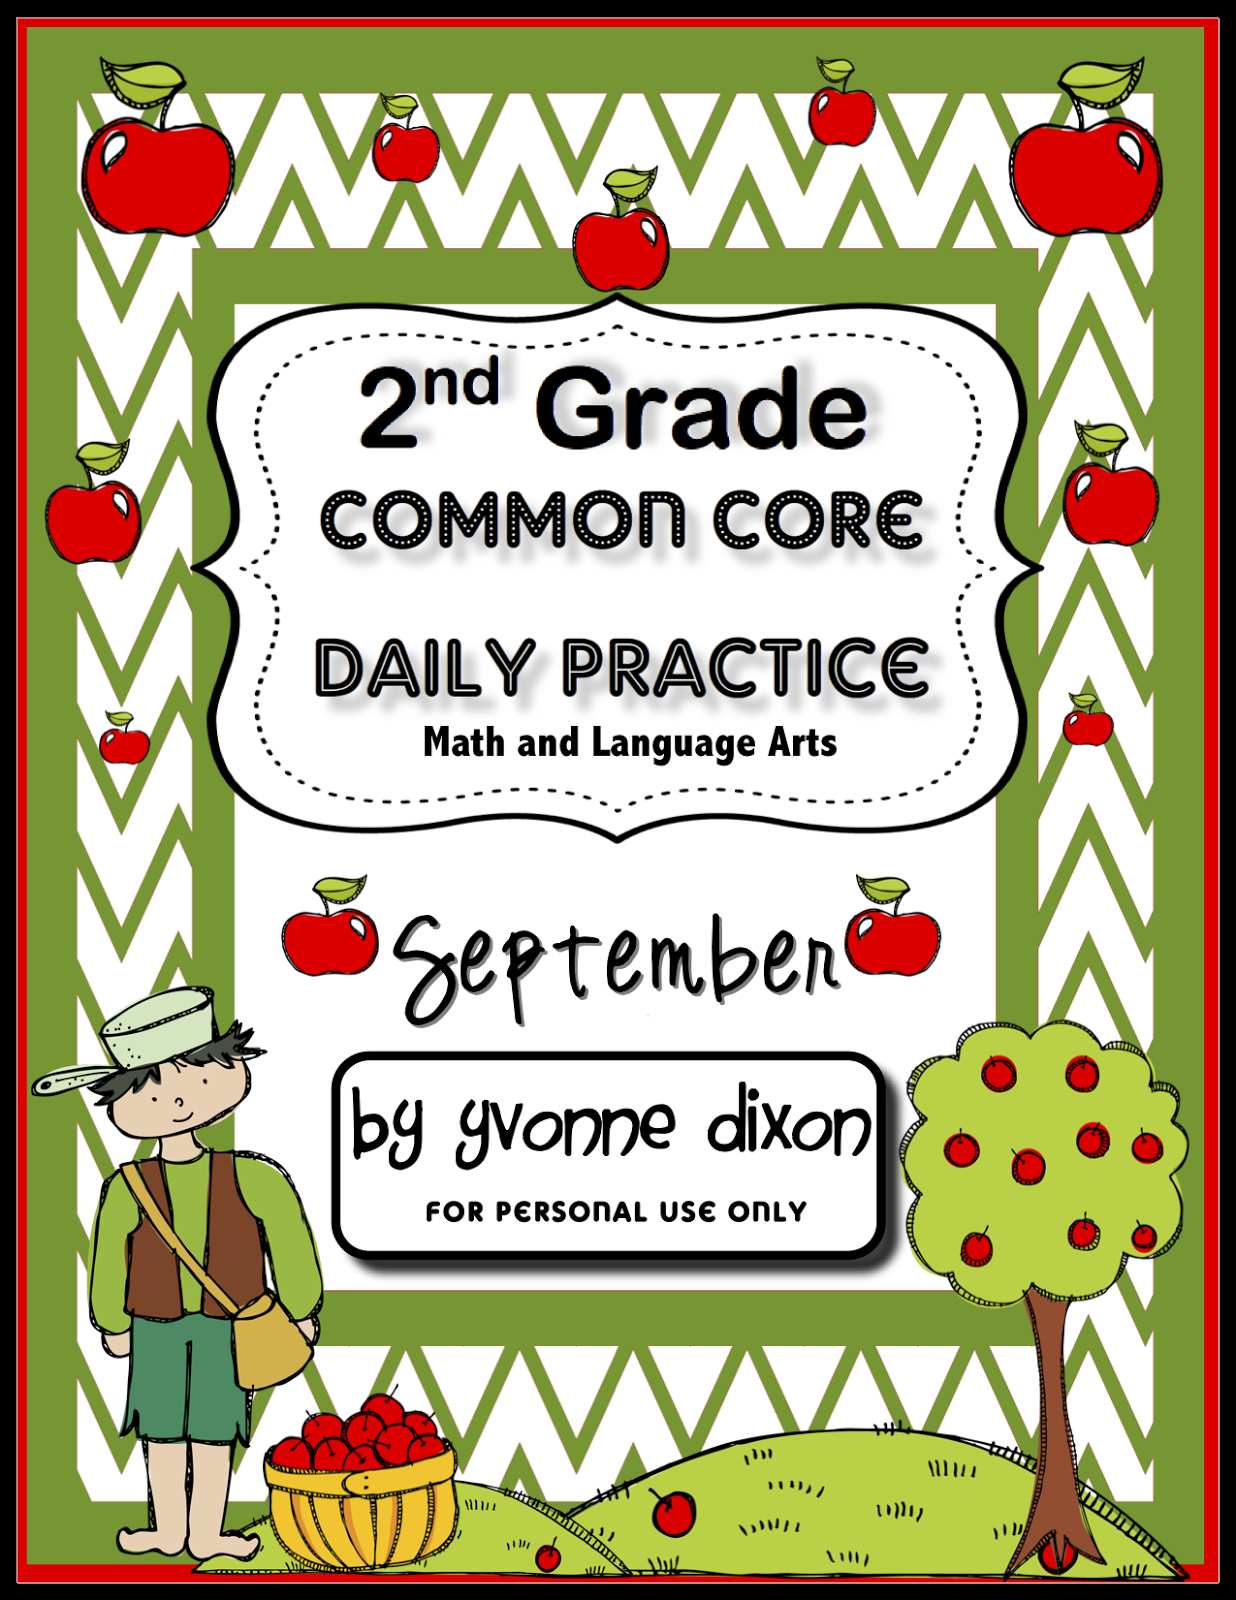 Common Core Daily Practice Sheets!